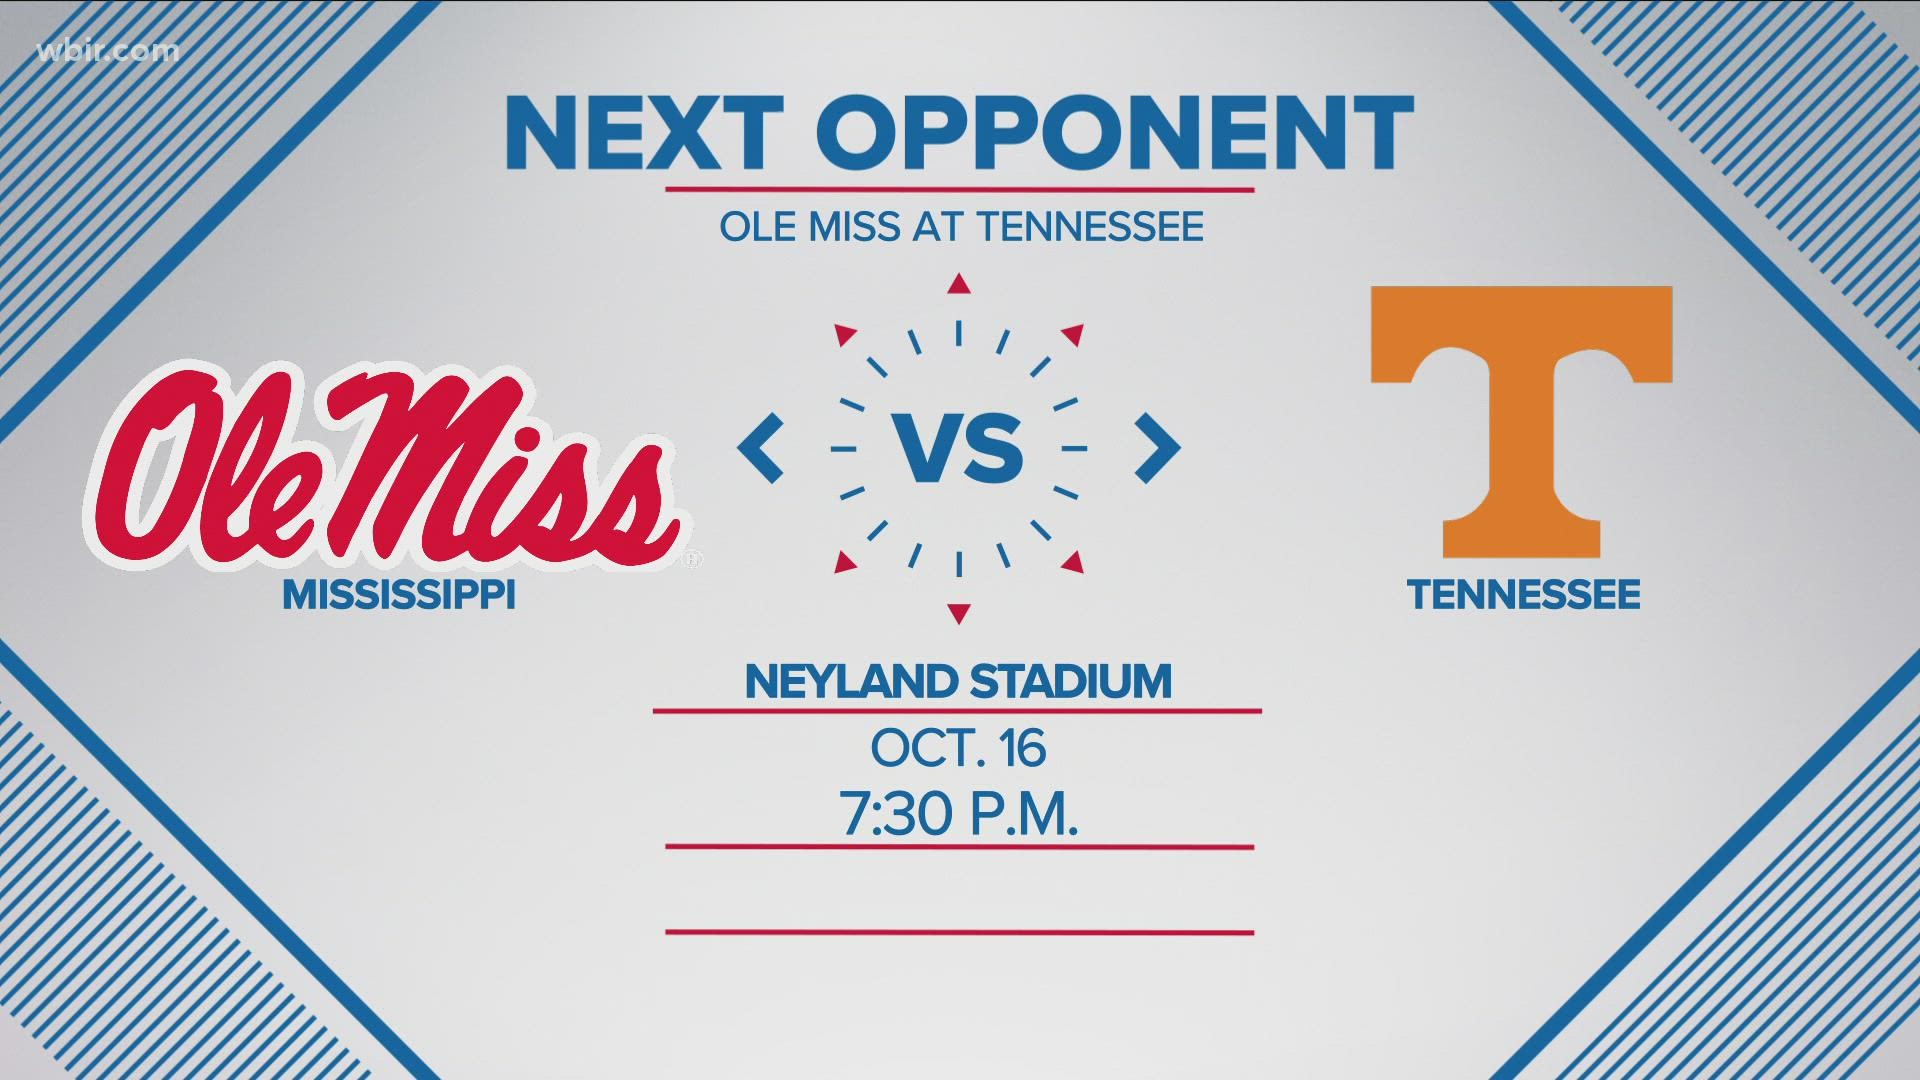 Neyland Stadium will be checkered in orange and white for Tennessee's home game against Ole Miss.